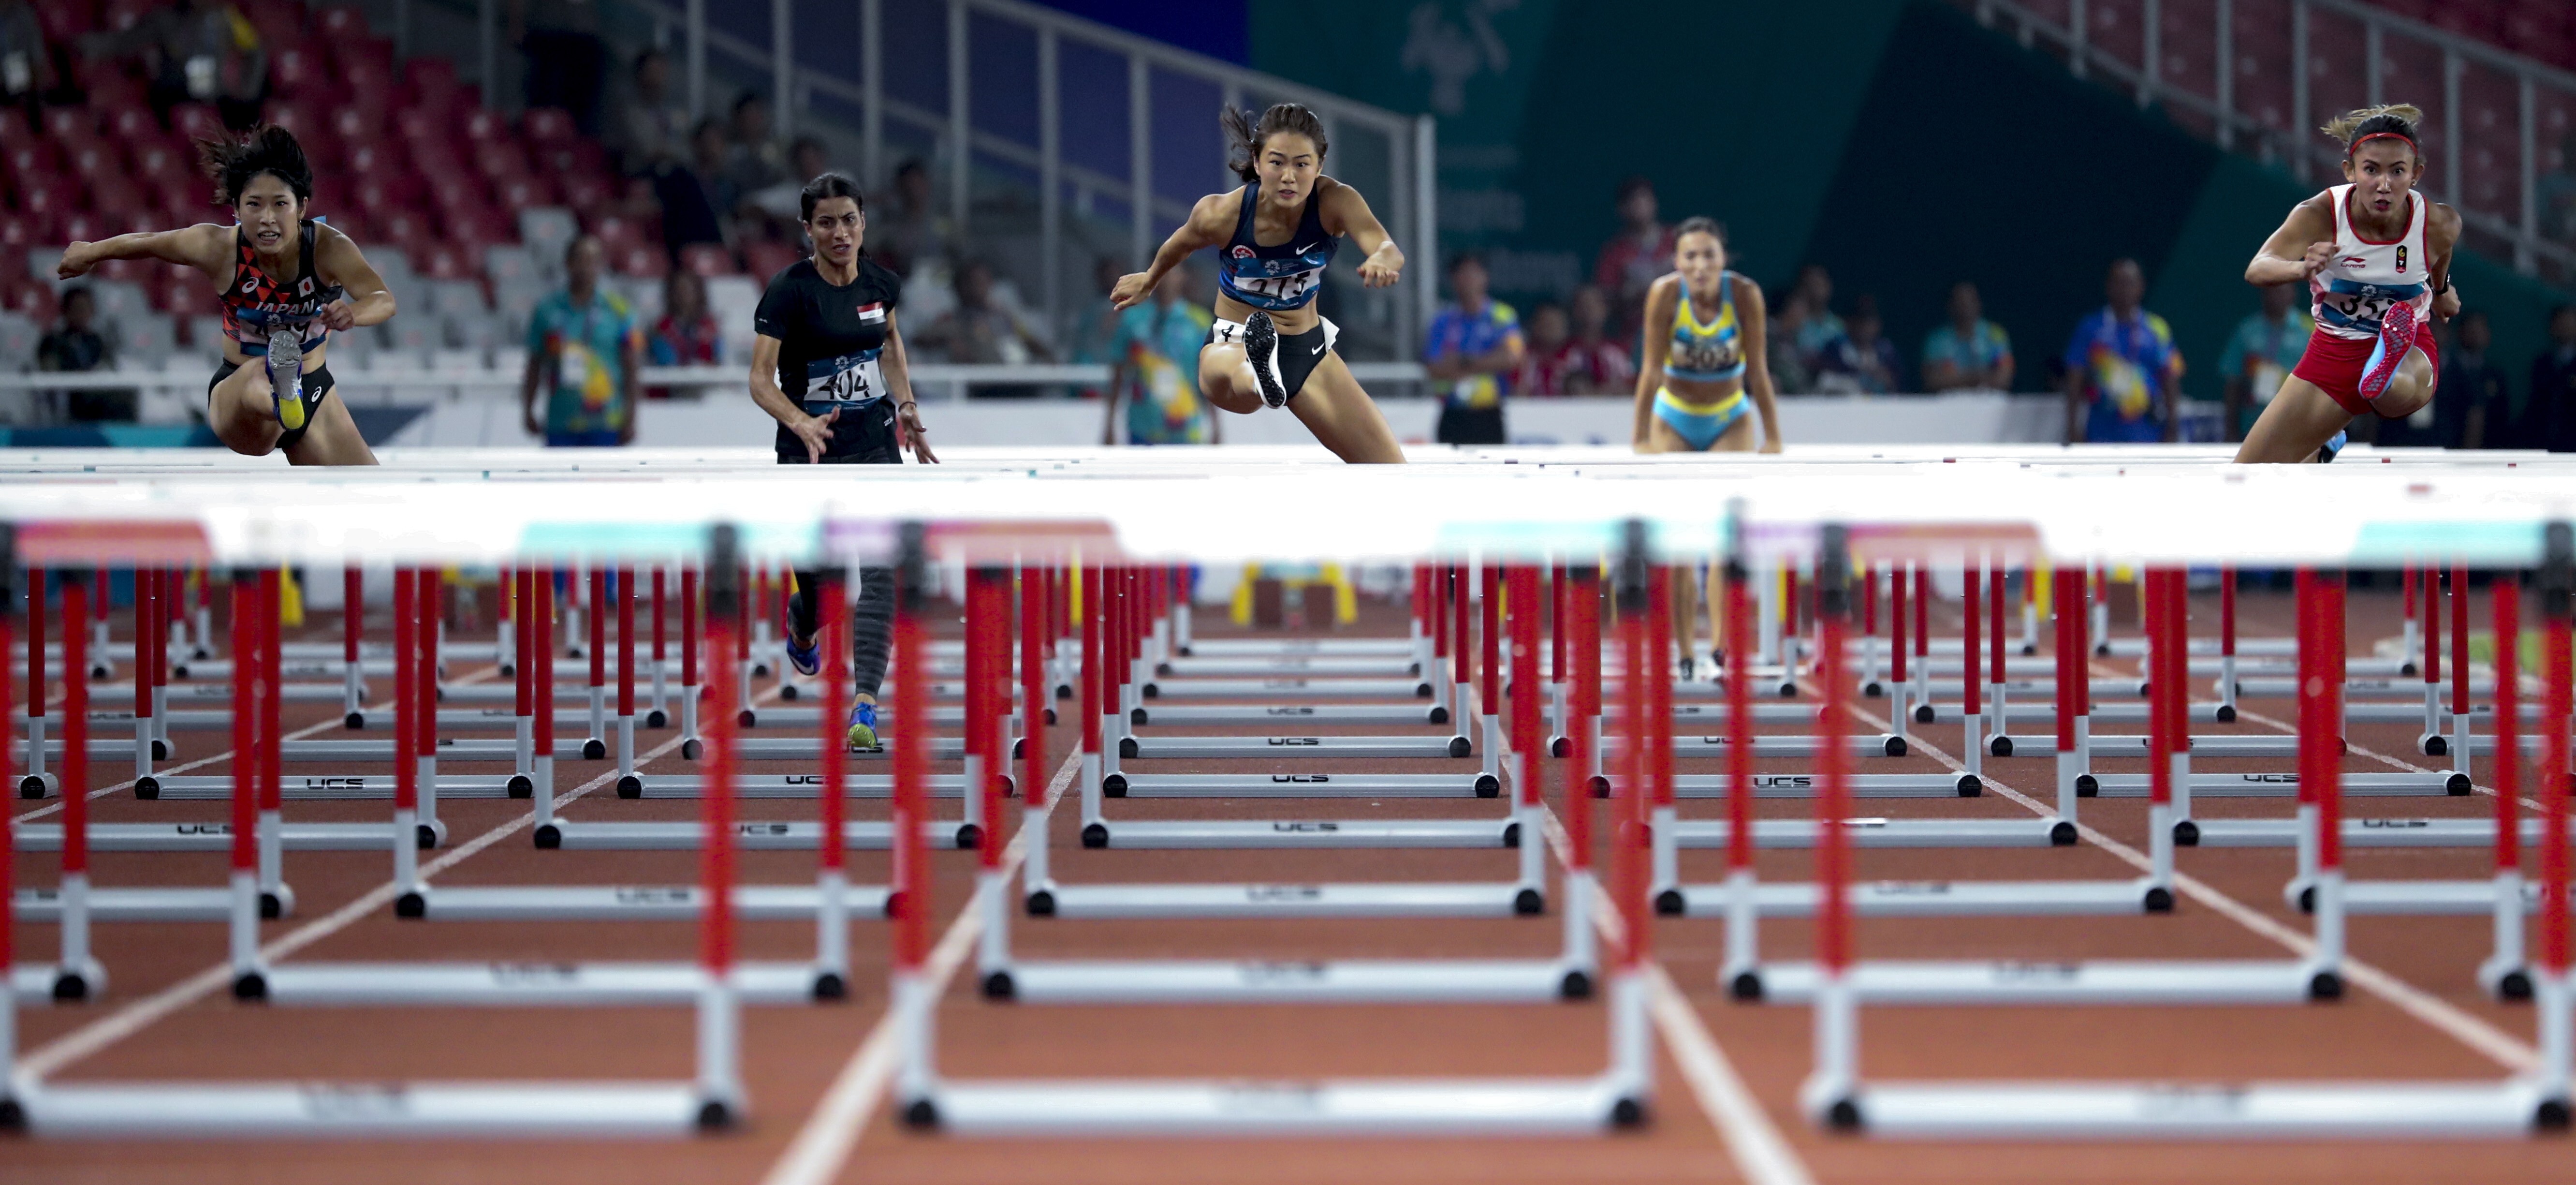 Vera Lui competes at the 2018 Asian Games in Jakarta, where she won Hong Kong’s first ever women’s track and field medal in the Games. Photo: EPA